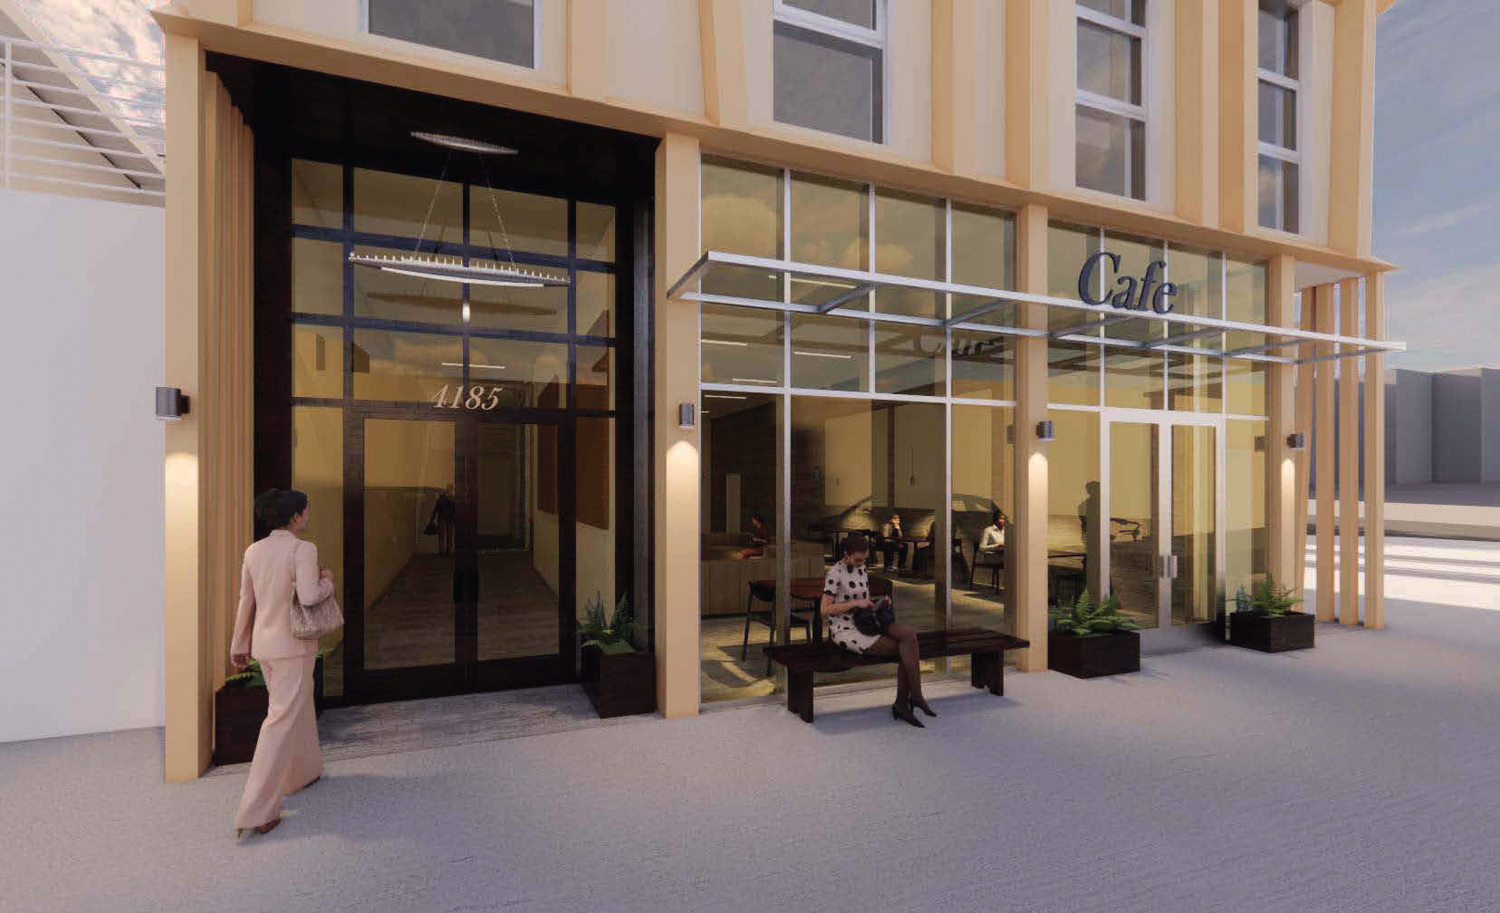 4185 Piedmont Avenue retail and lobby view, rendering by Kava Massih Architects